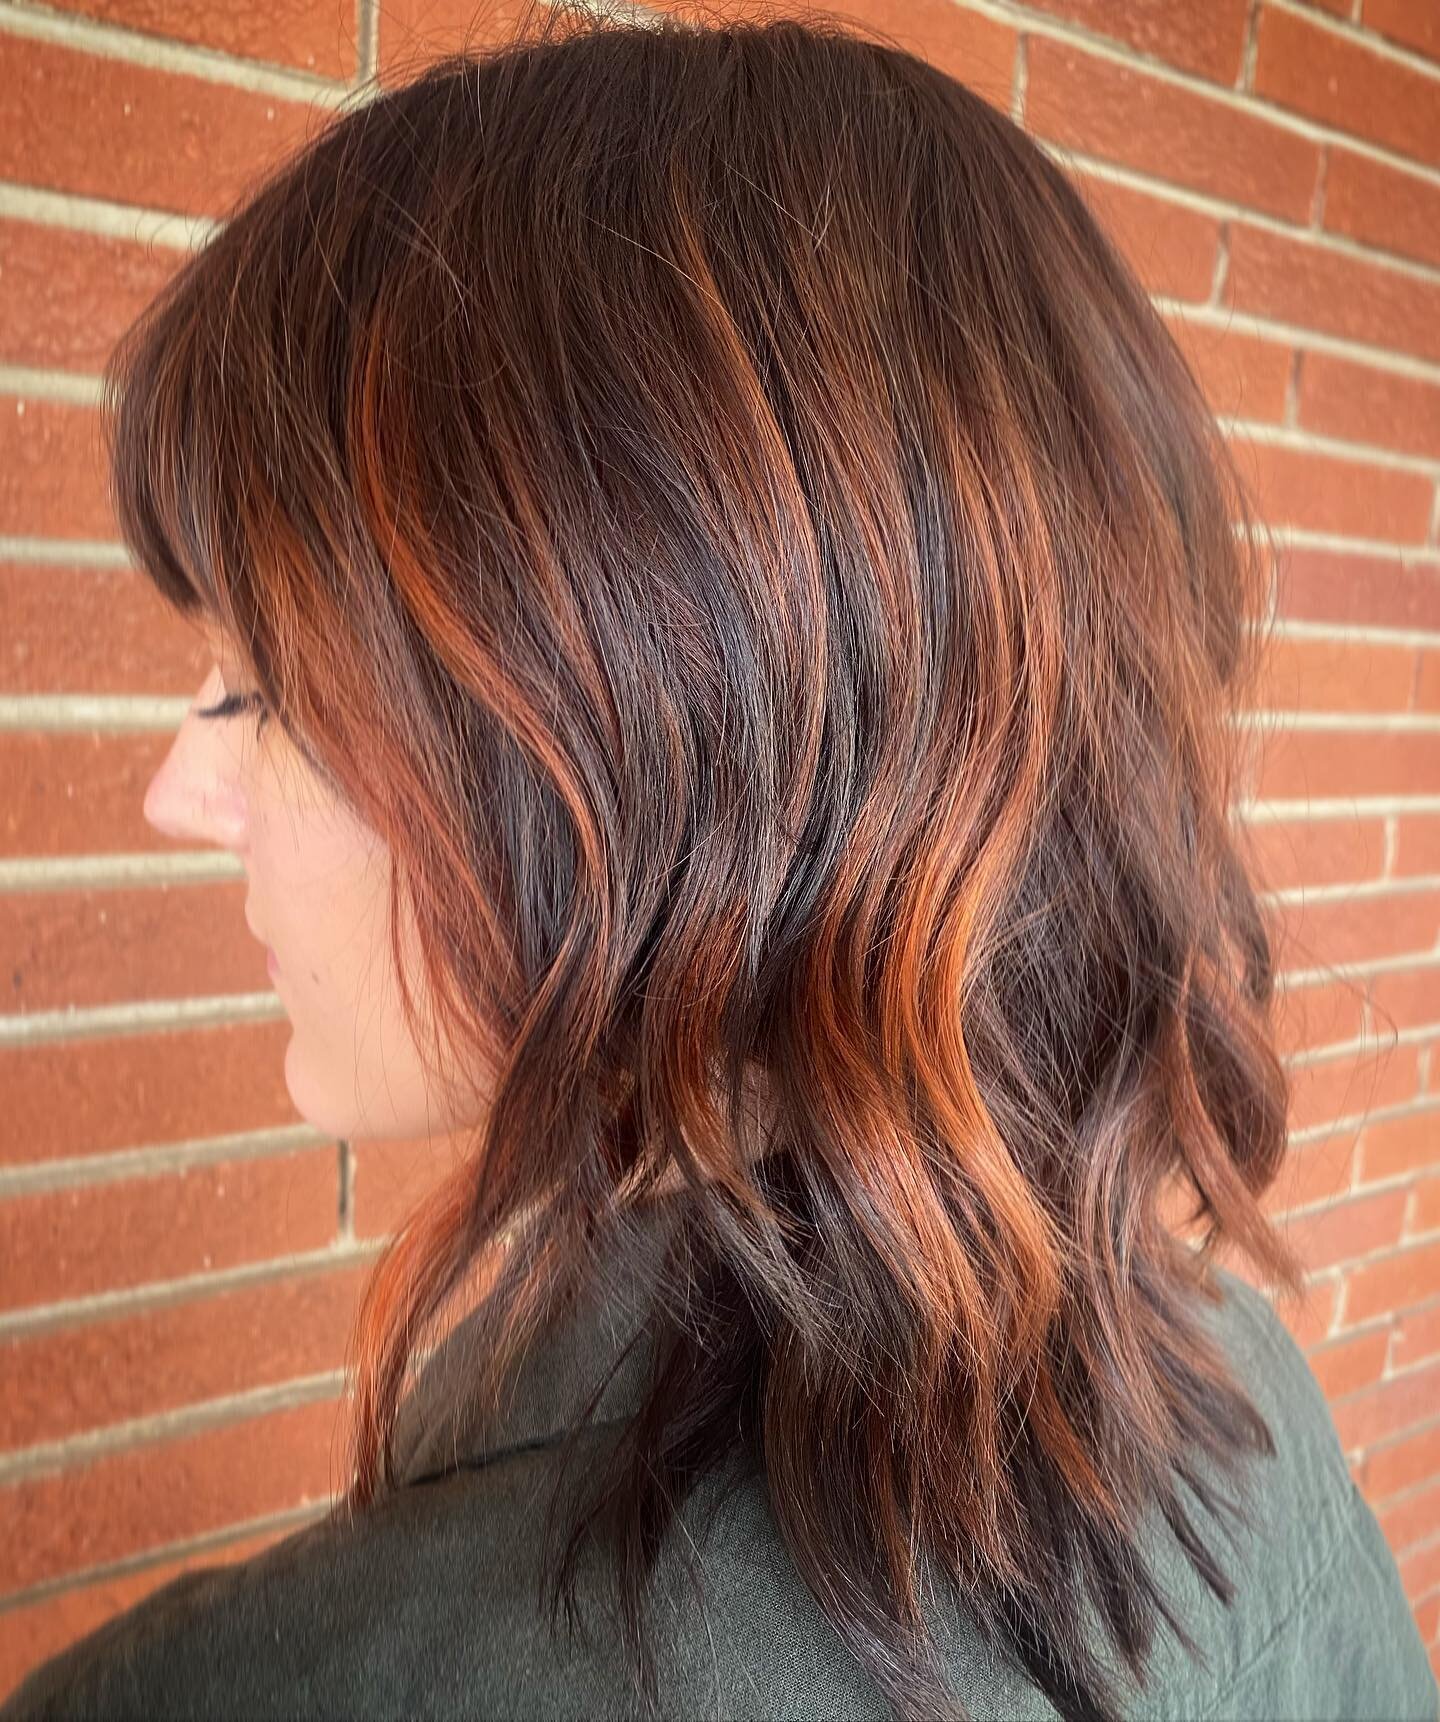 We still have availability in May! Link is in bio to book with any of our talented stylist! 
.
.
.

#thewaywardparlor #southsideatlhair #atlhaircolor #westendbestendatl #atlhairwitch #haylienhair #teamwaywardparlor #atlhaircolorist #atlhairmagic #sou